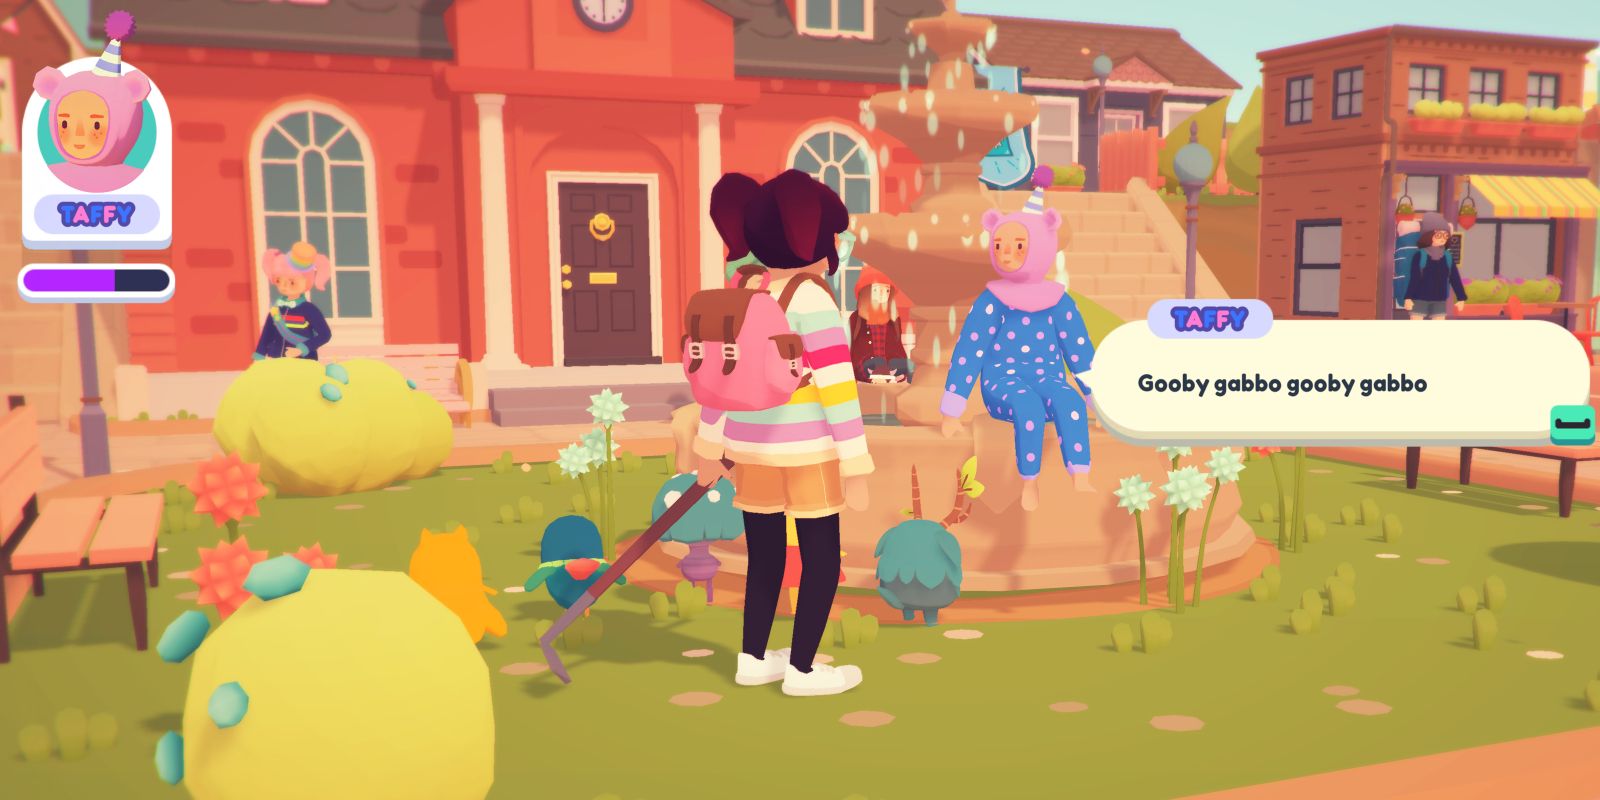 How to Fix Gimble’s Balloon in Ooblets